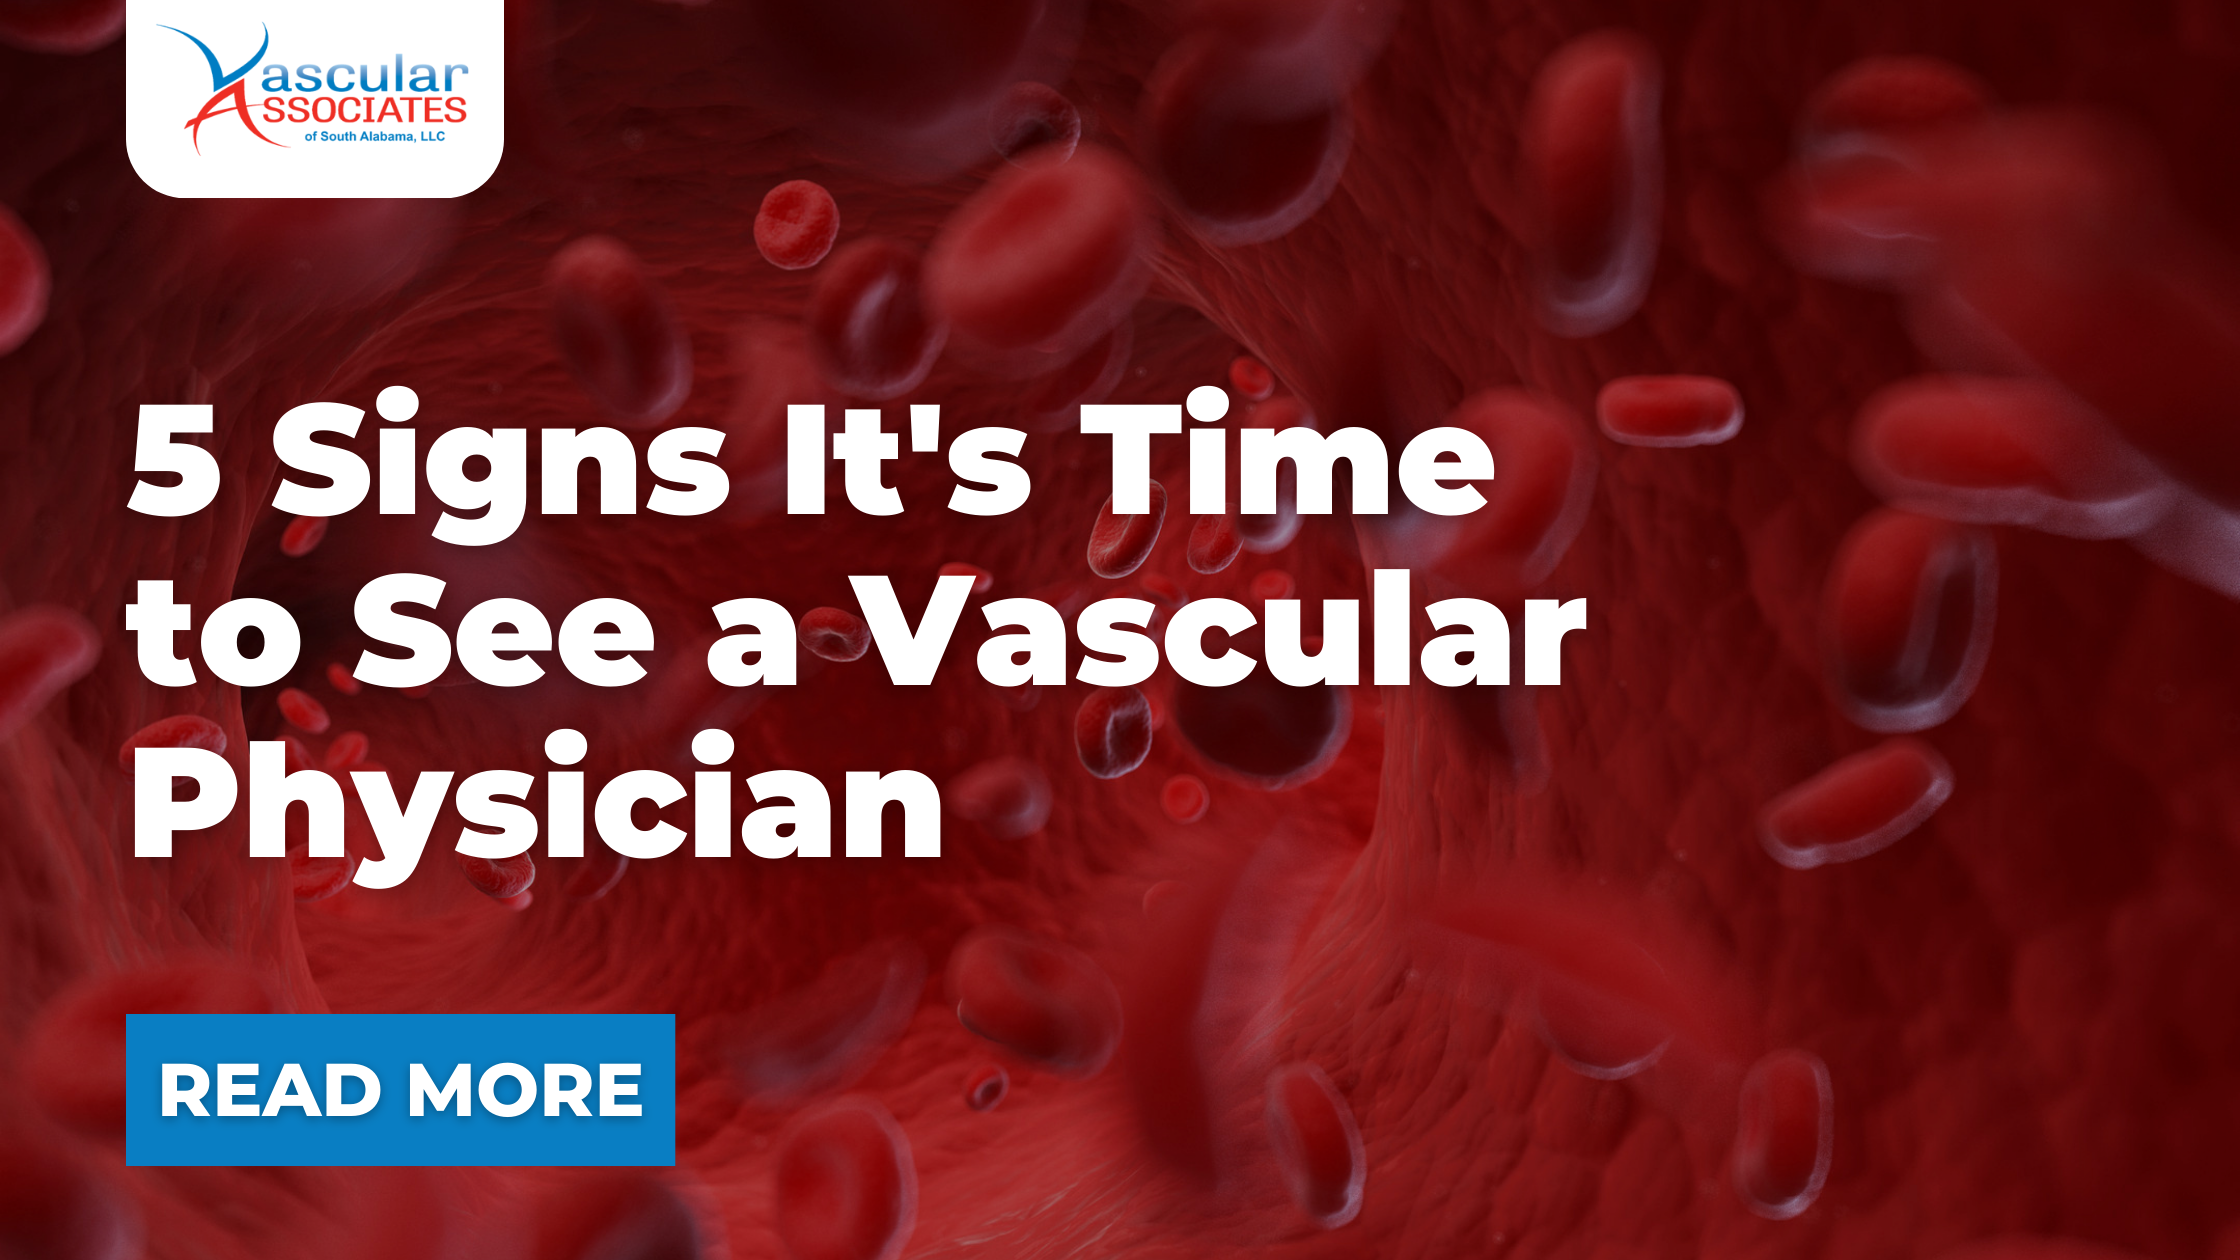 Vascular Blog - 5 Signs It's Time to See a Vascular Physician.png